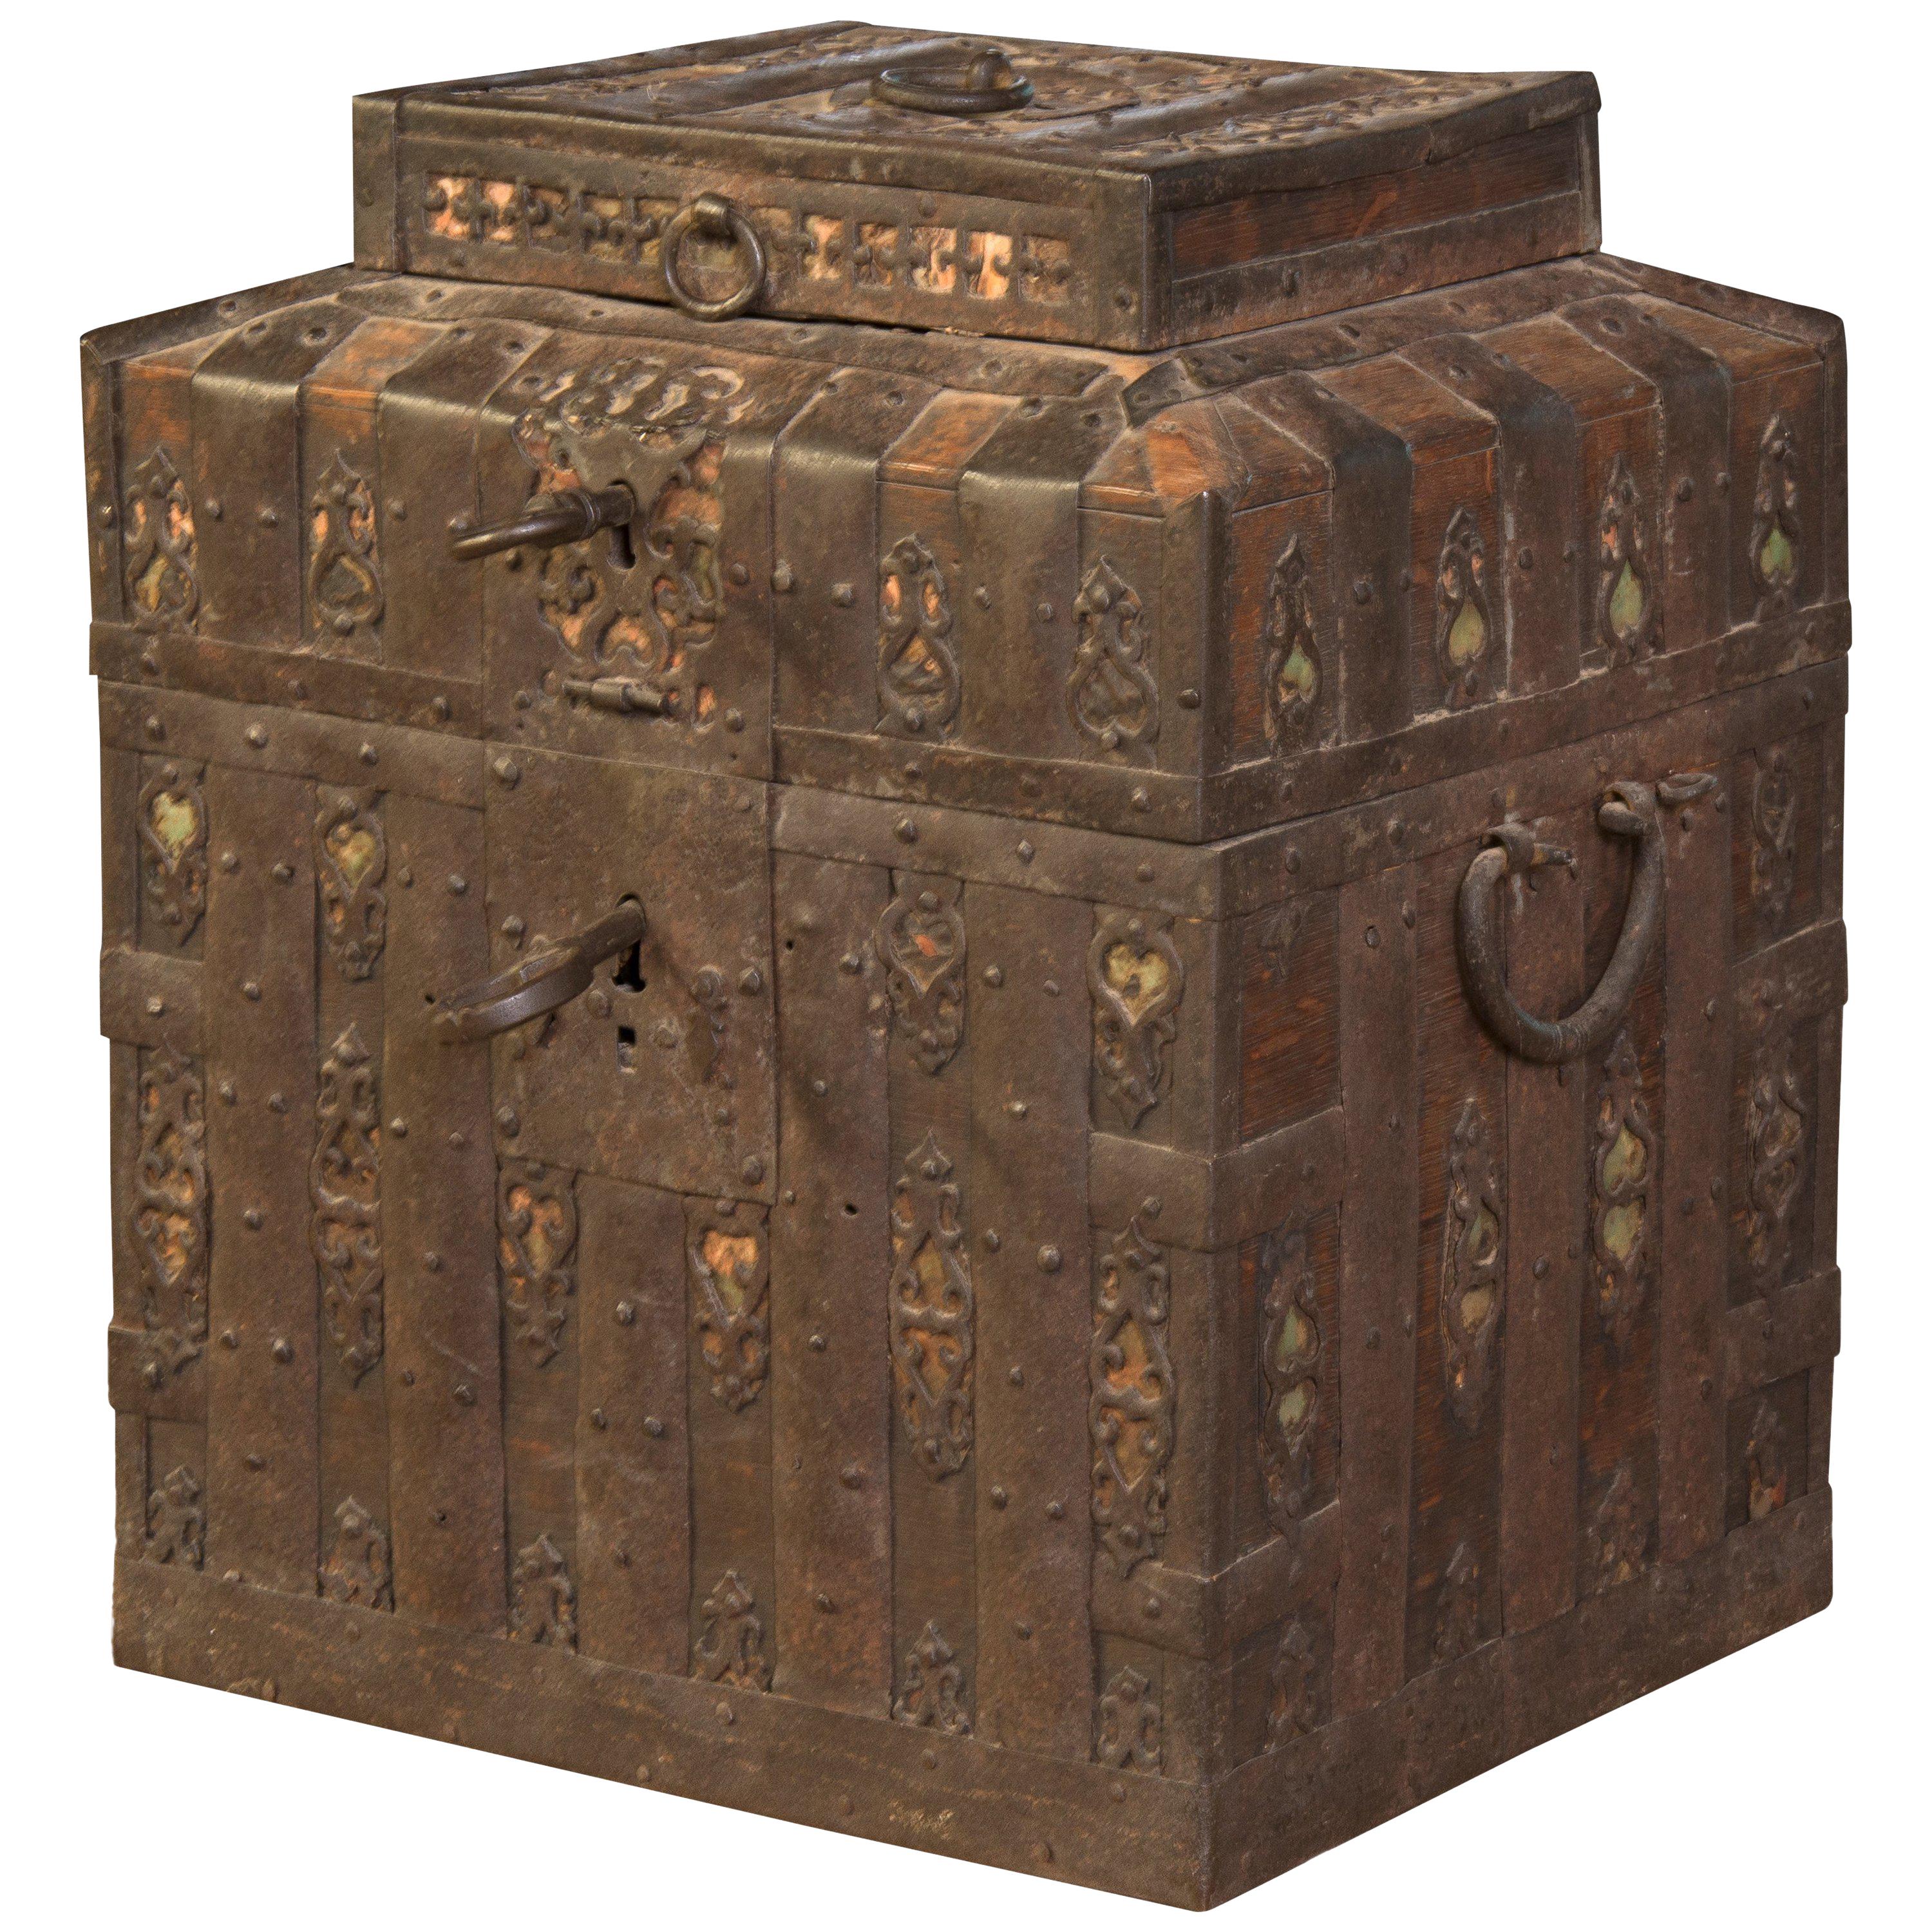 Ironbound Strongbox or Chest, Wrought Iron, Wood, Possibly Russia, 17th Century